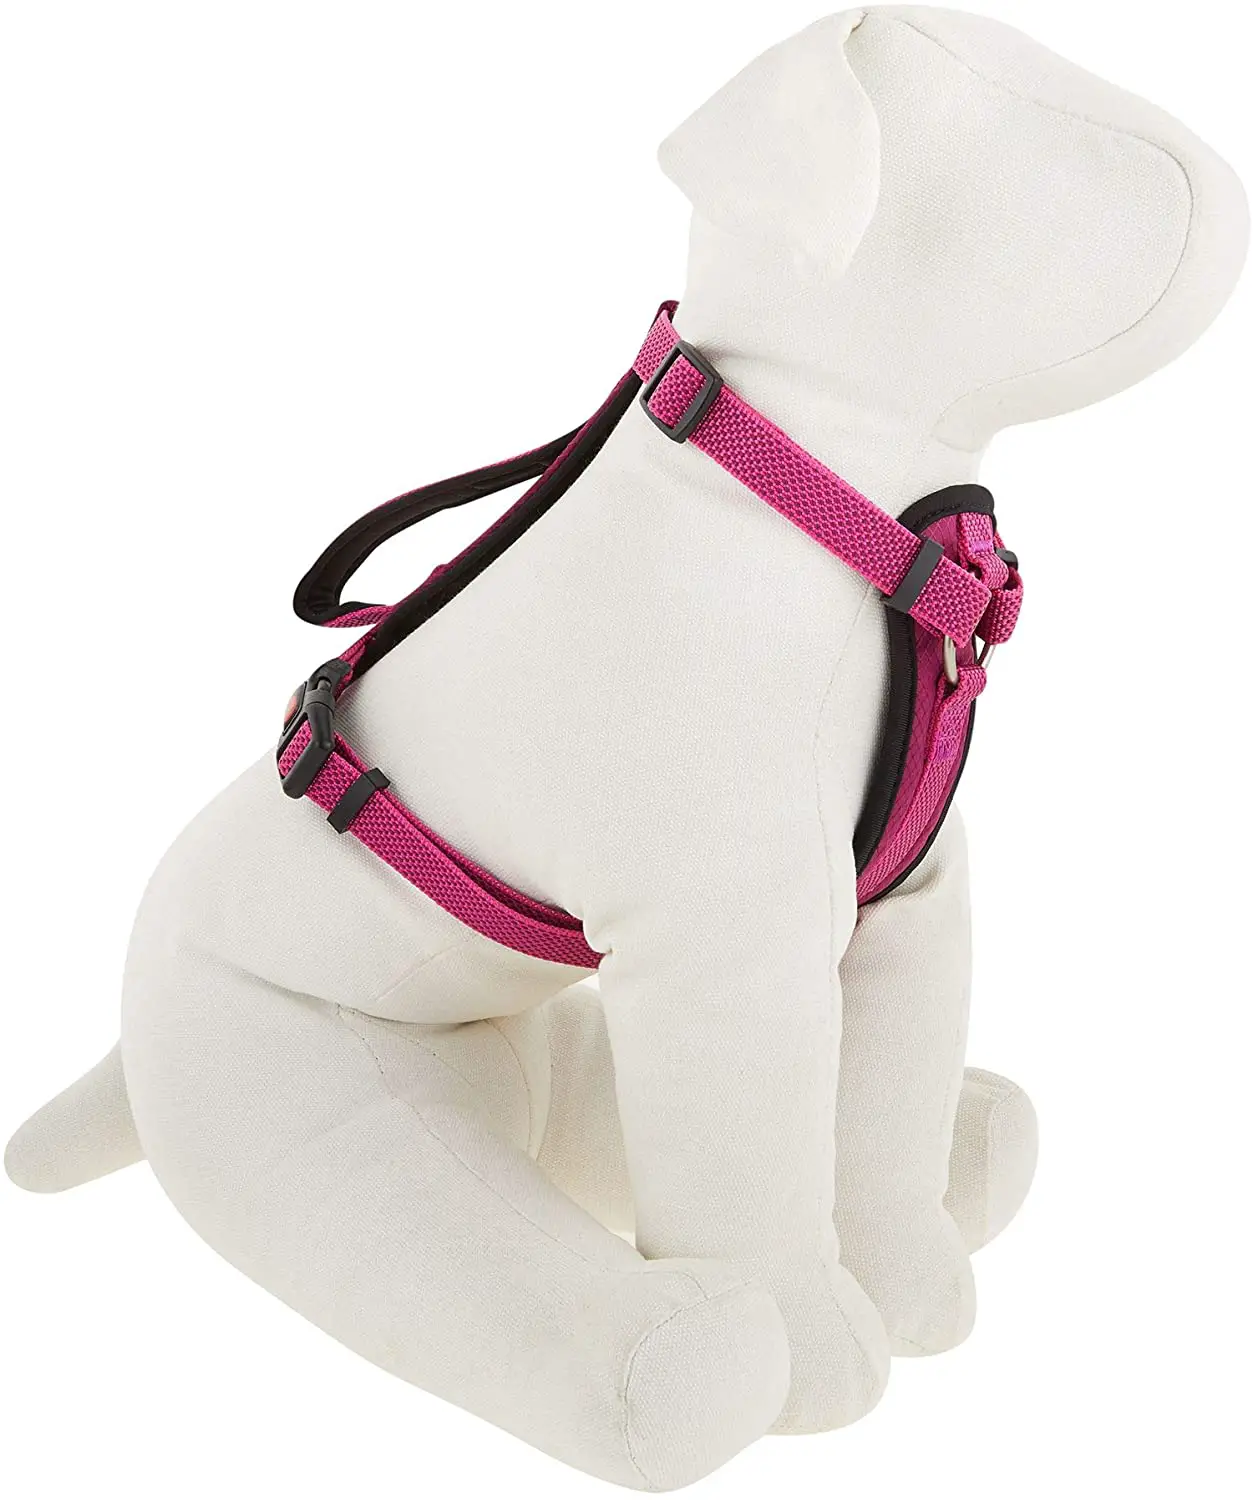 KONG Comfort Padded Chest Plate Dog Harness